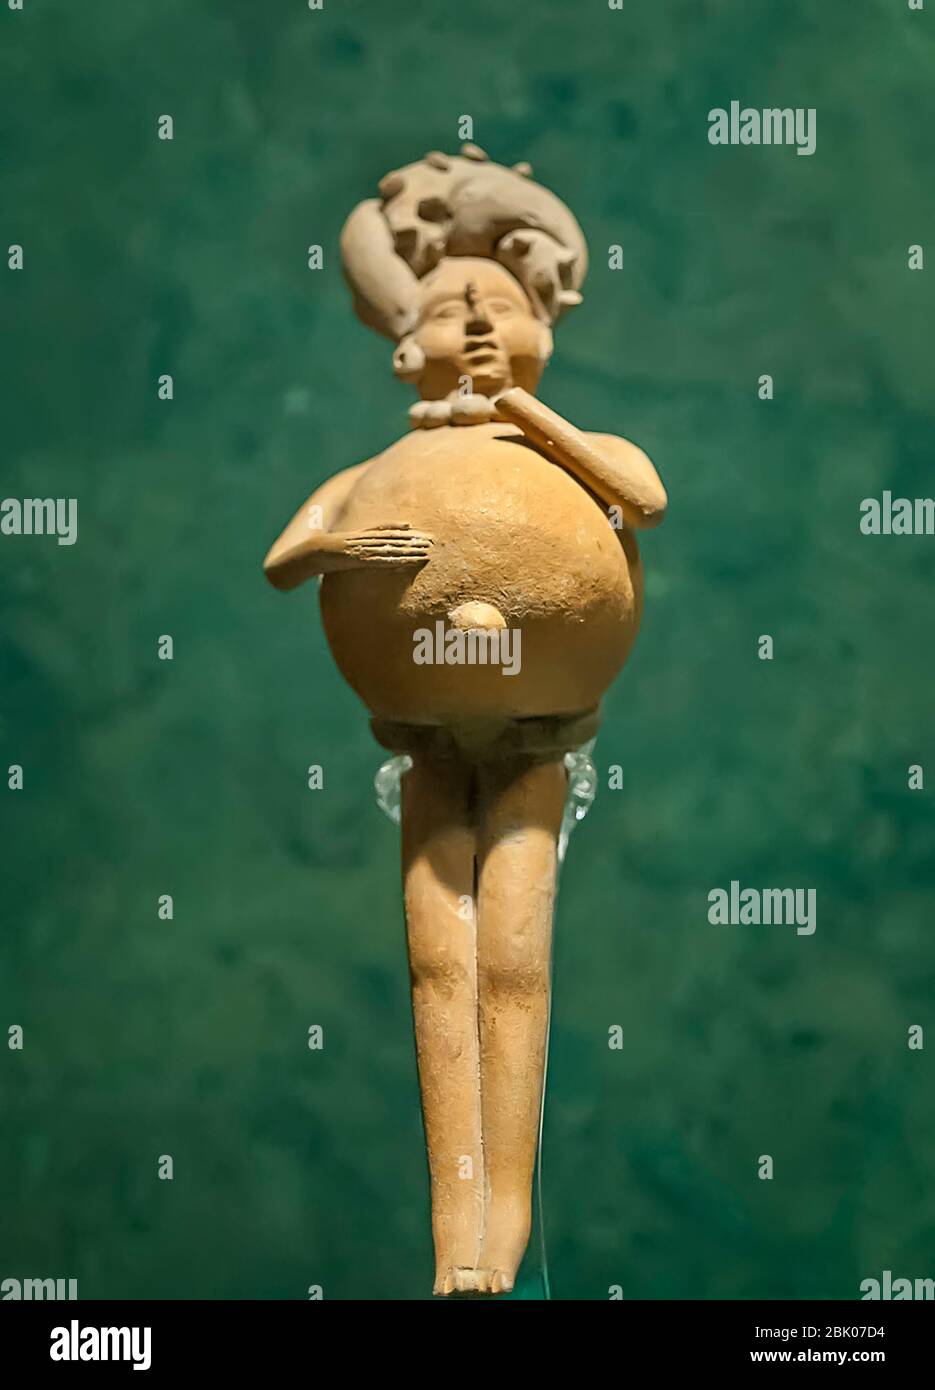 Figurine of pregnant woman, Anthropology Museum, Mexico City, Mexico Stock Photo